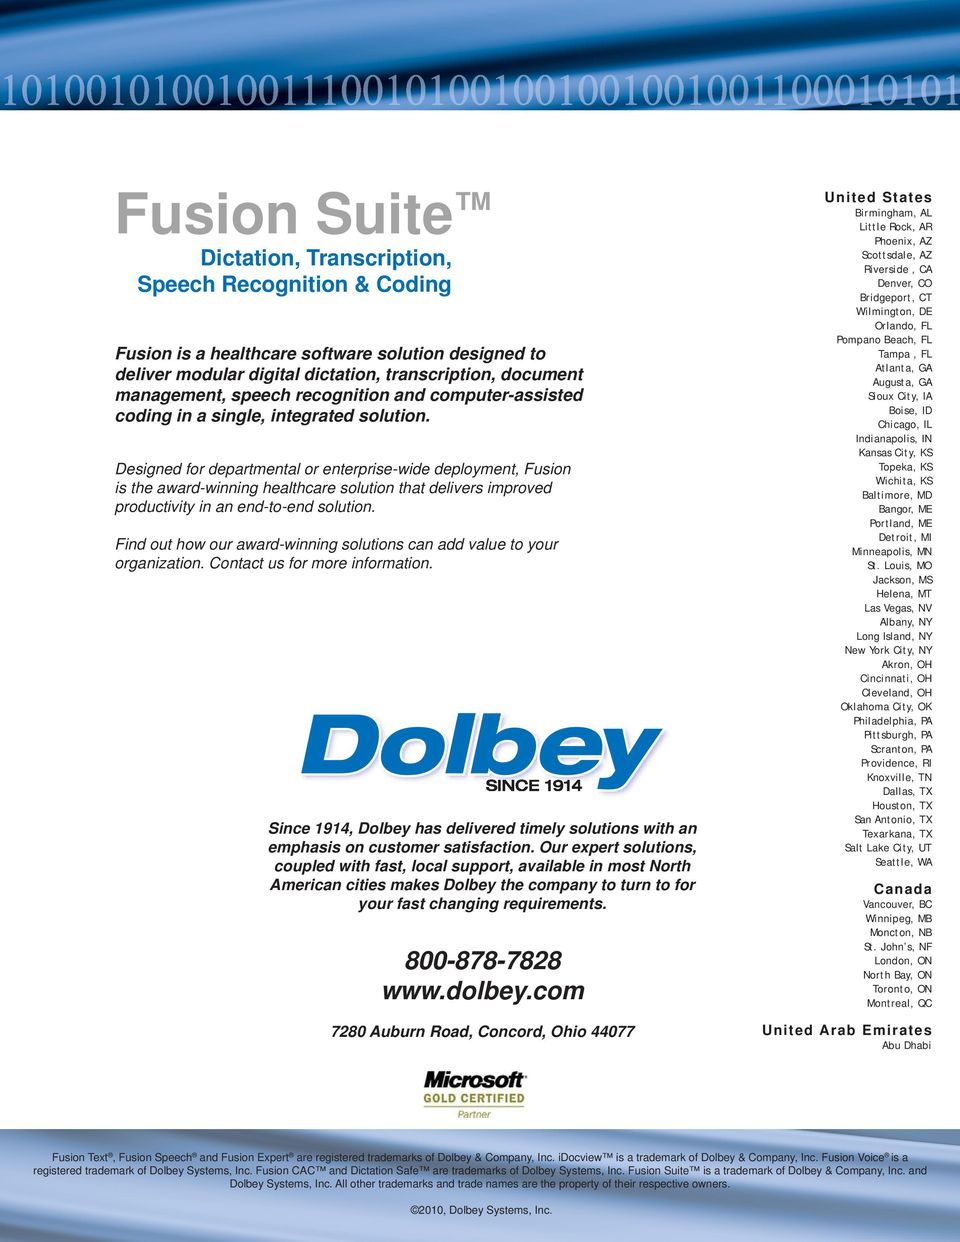 Designed for departmental or enterprise-wide deployment, Fusion is the award-winning healthcare solution that delivers improved productivity in an end-to-end solution.